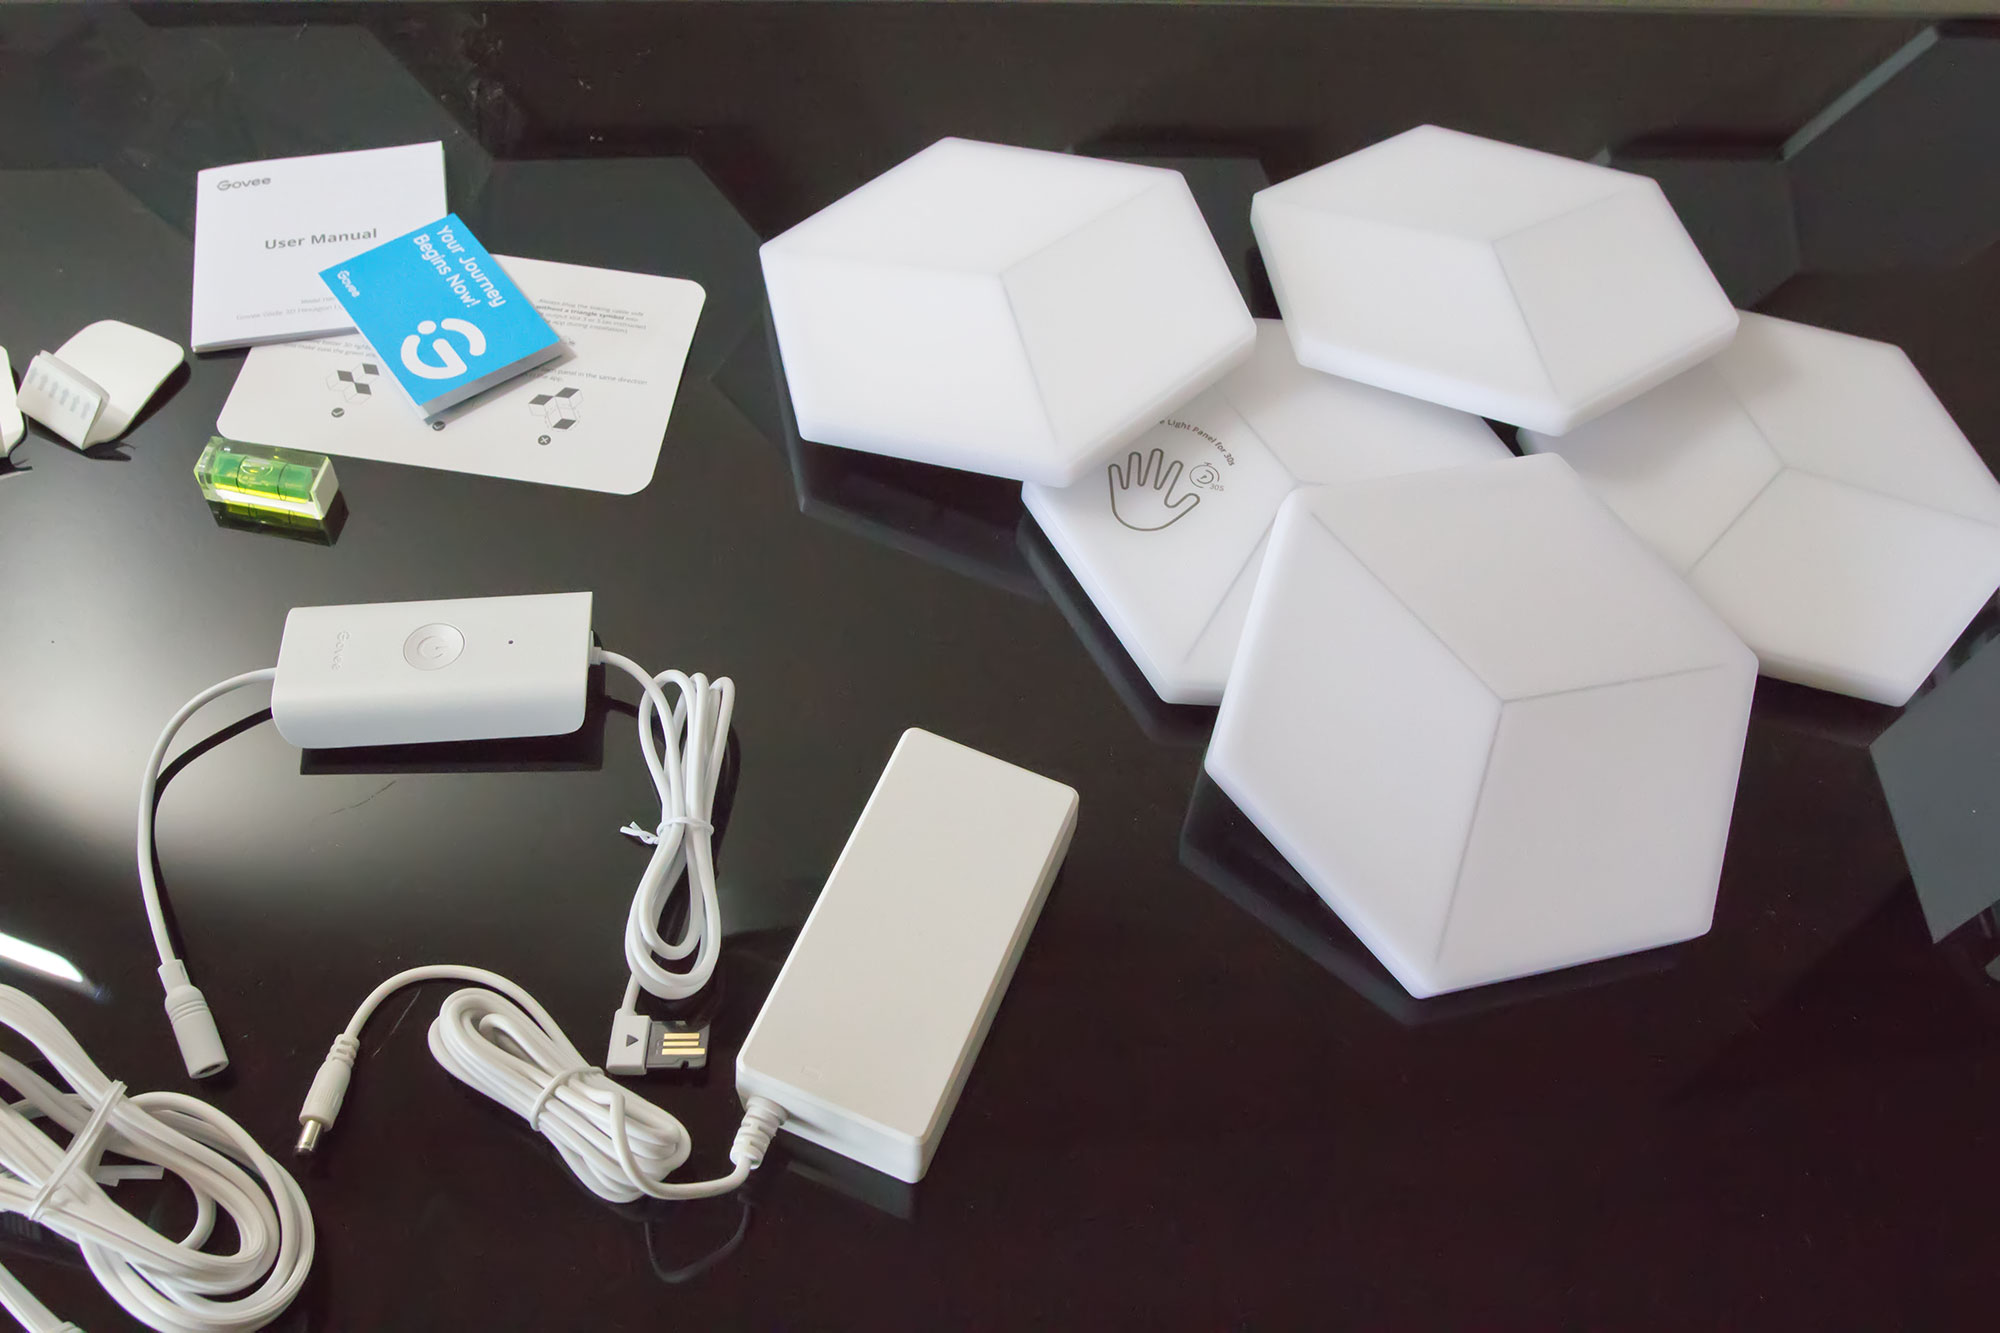 GOVEE on X: Introducing our new Govee Smart WiFi Electric